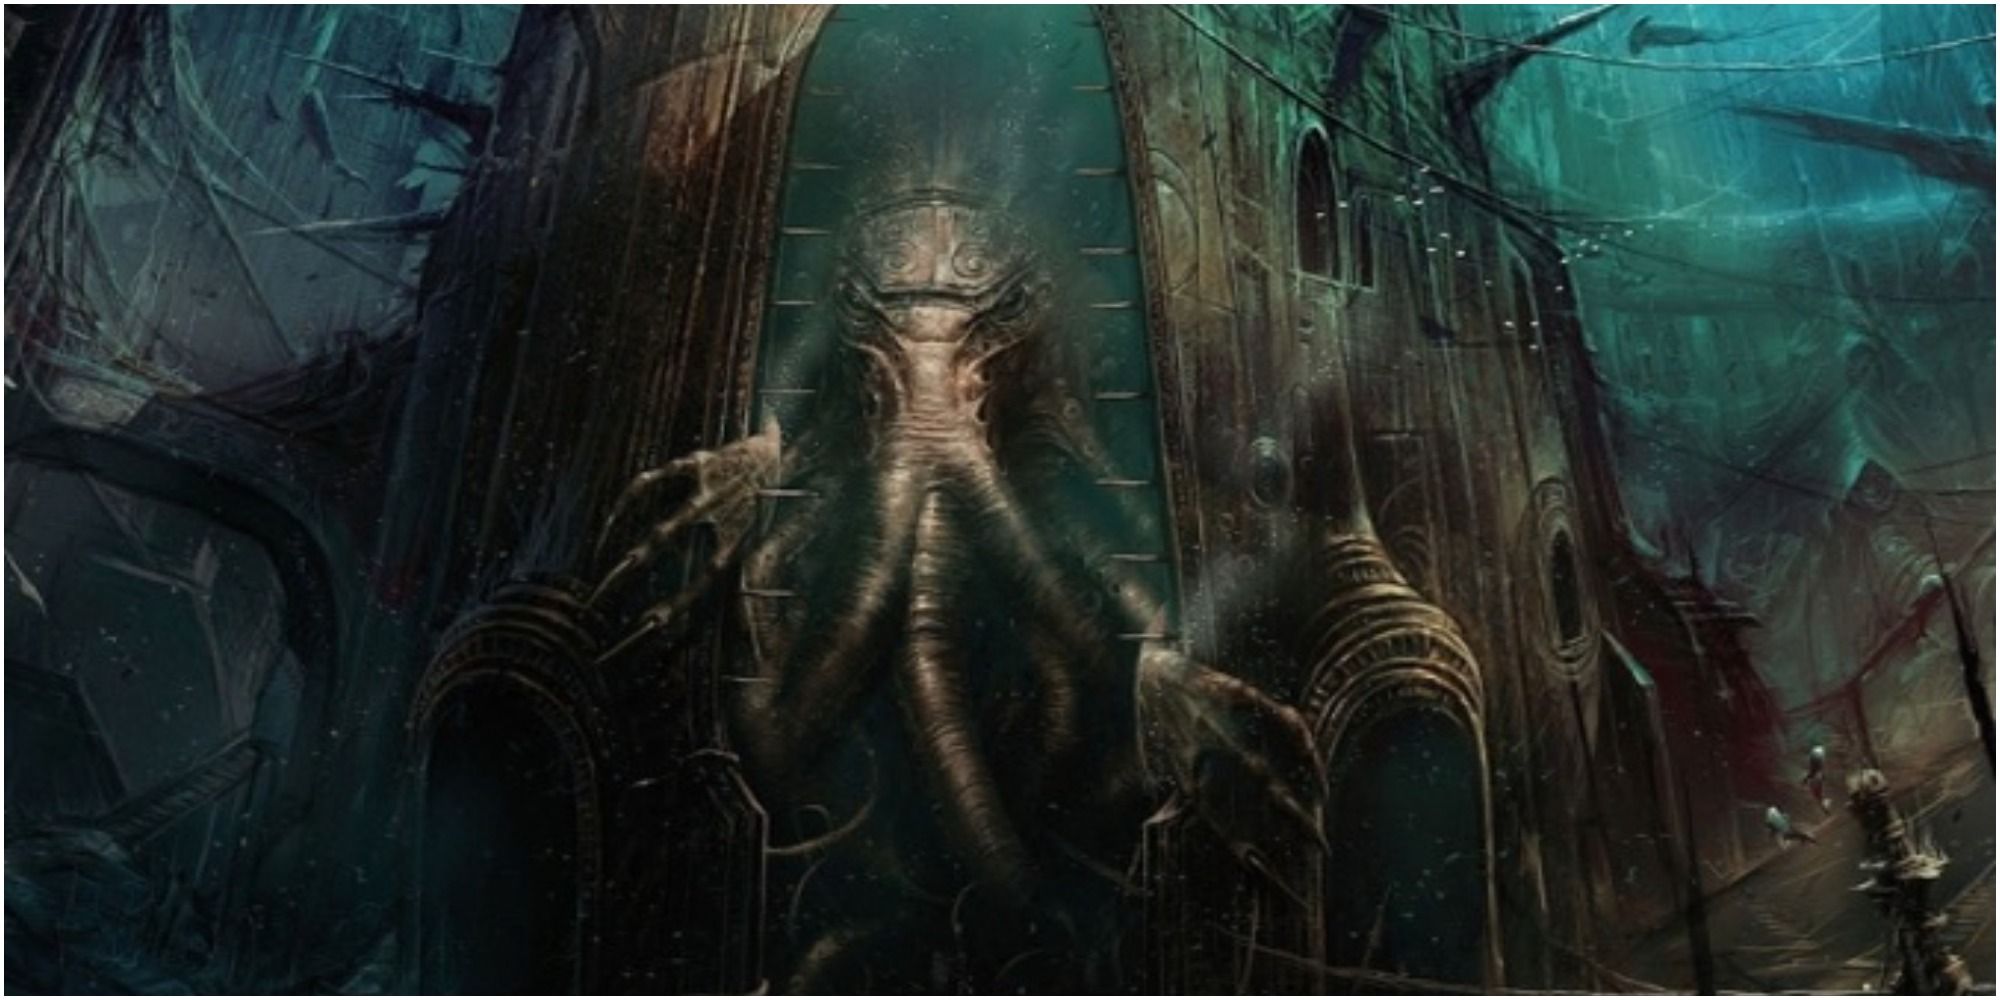 A statue of Cthulhu in a temple featured in the Call of Cthulhu books